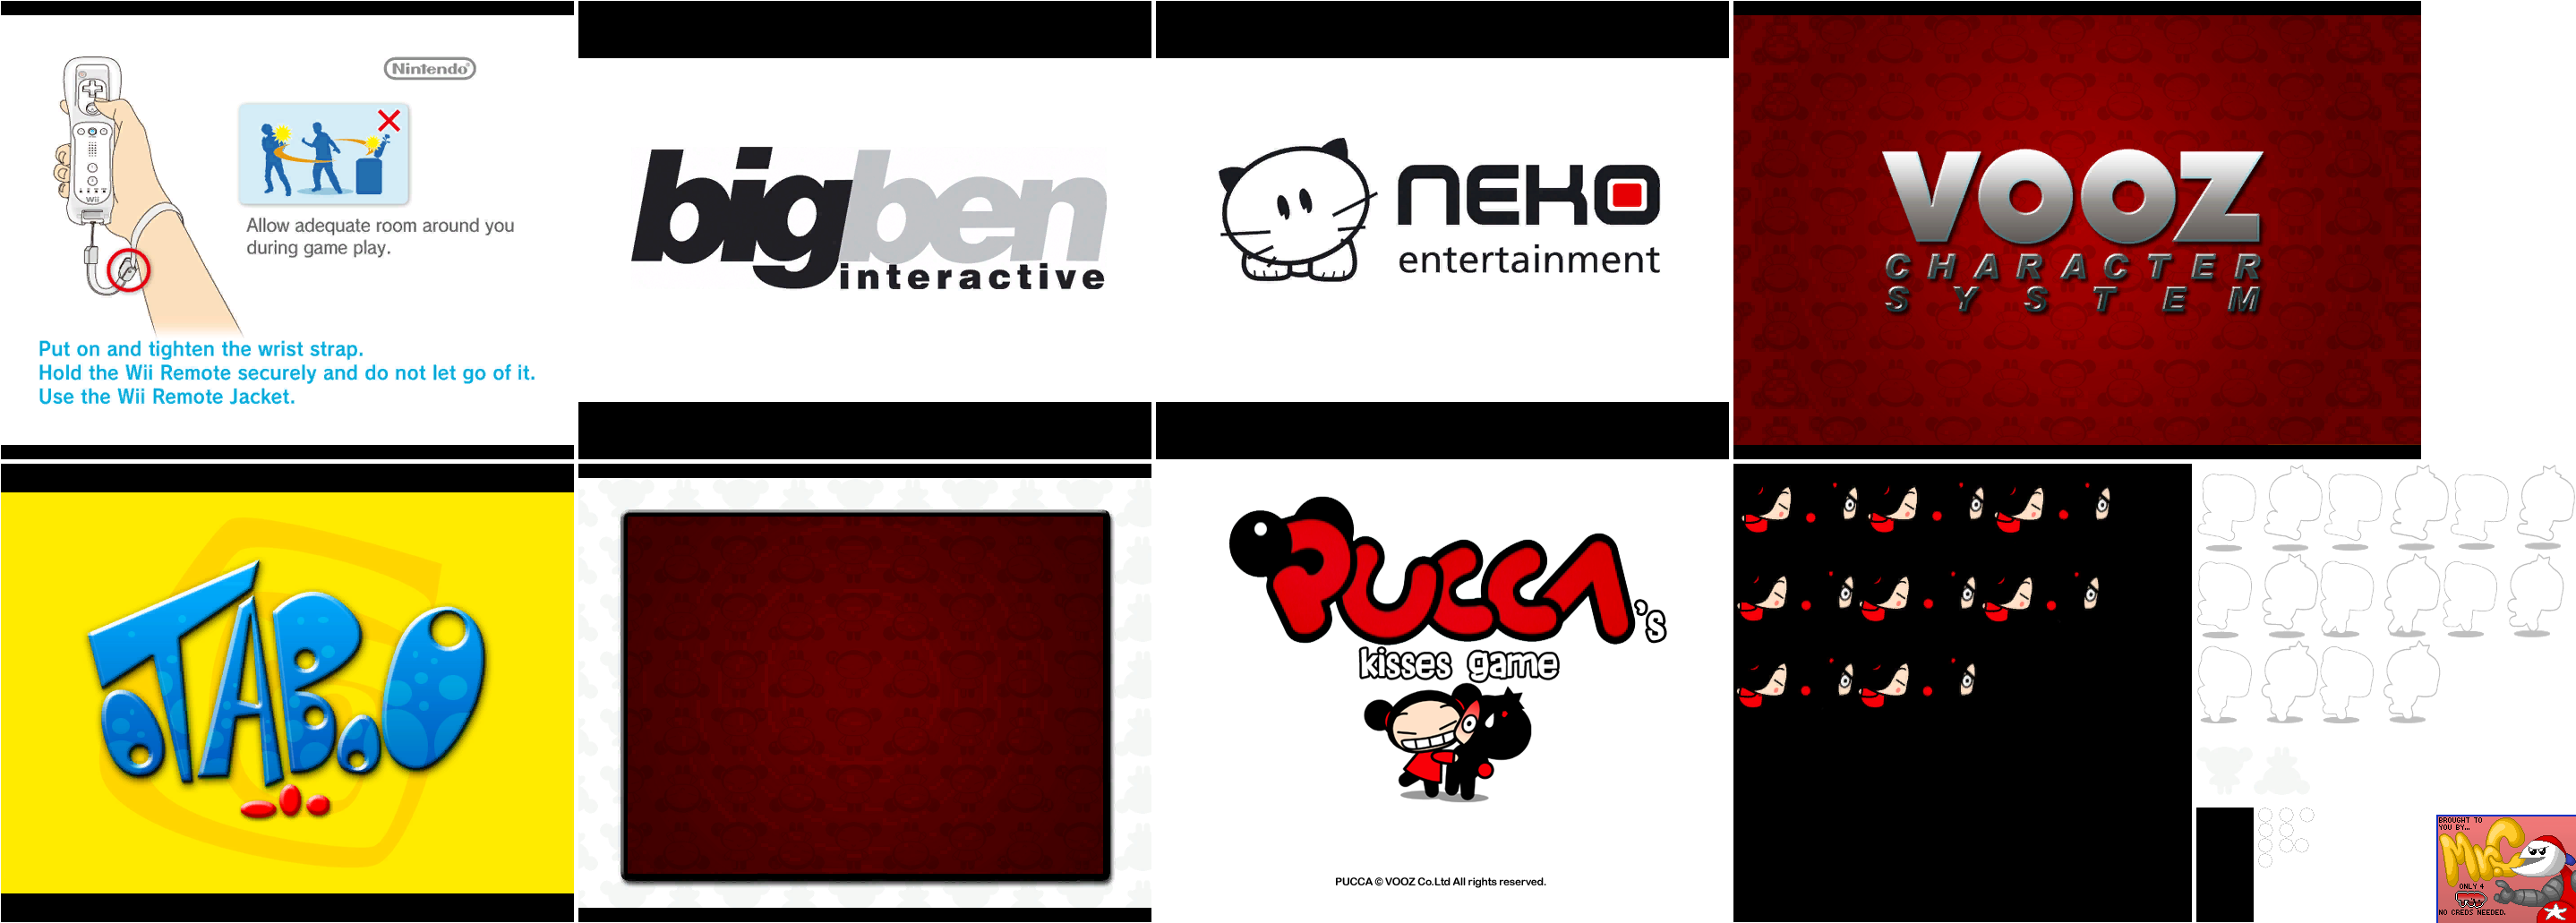 Pucca's Kisses Game - Title Screen and Logos